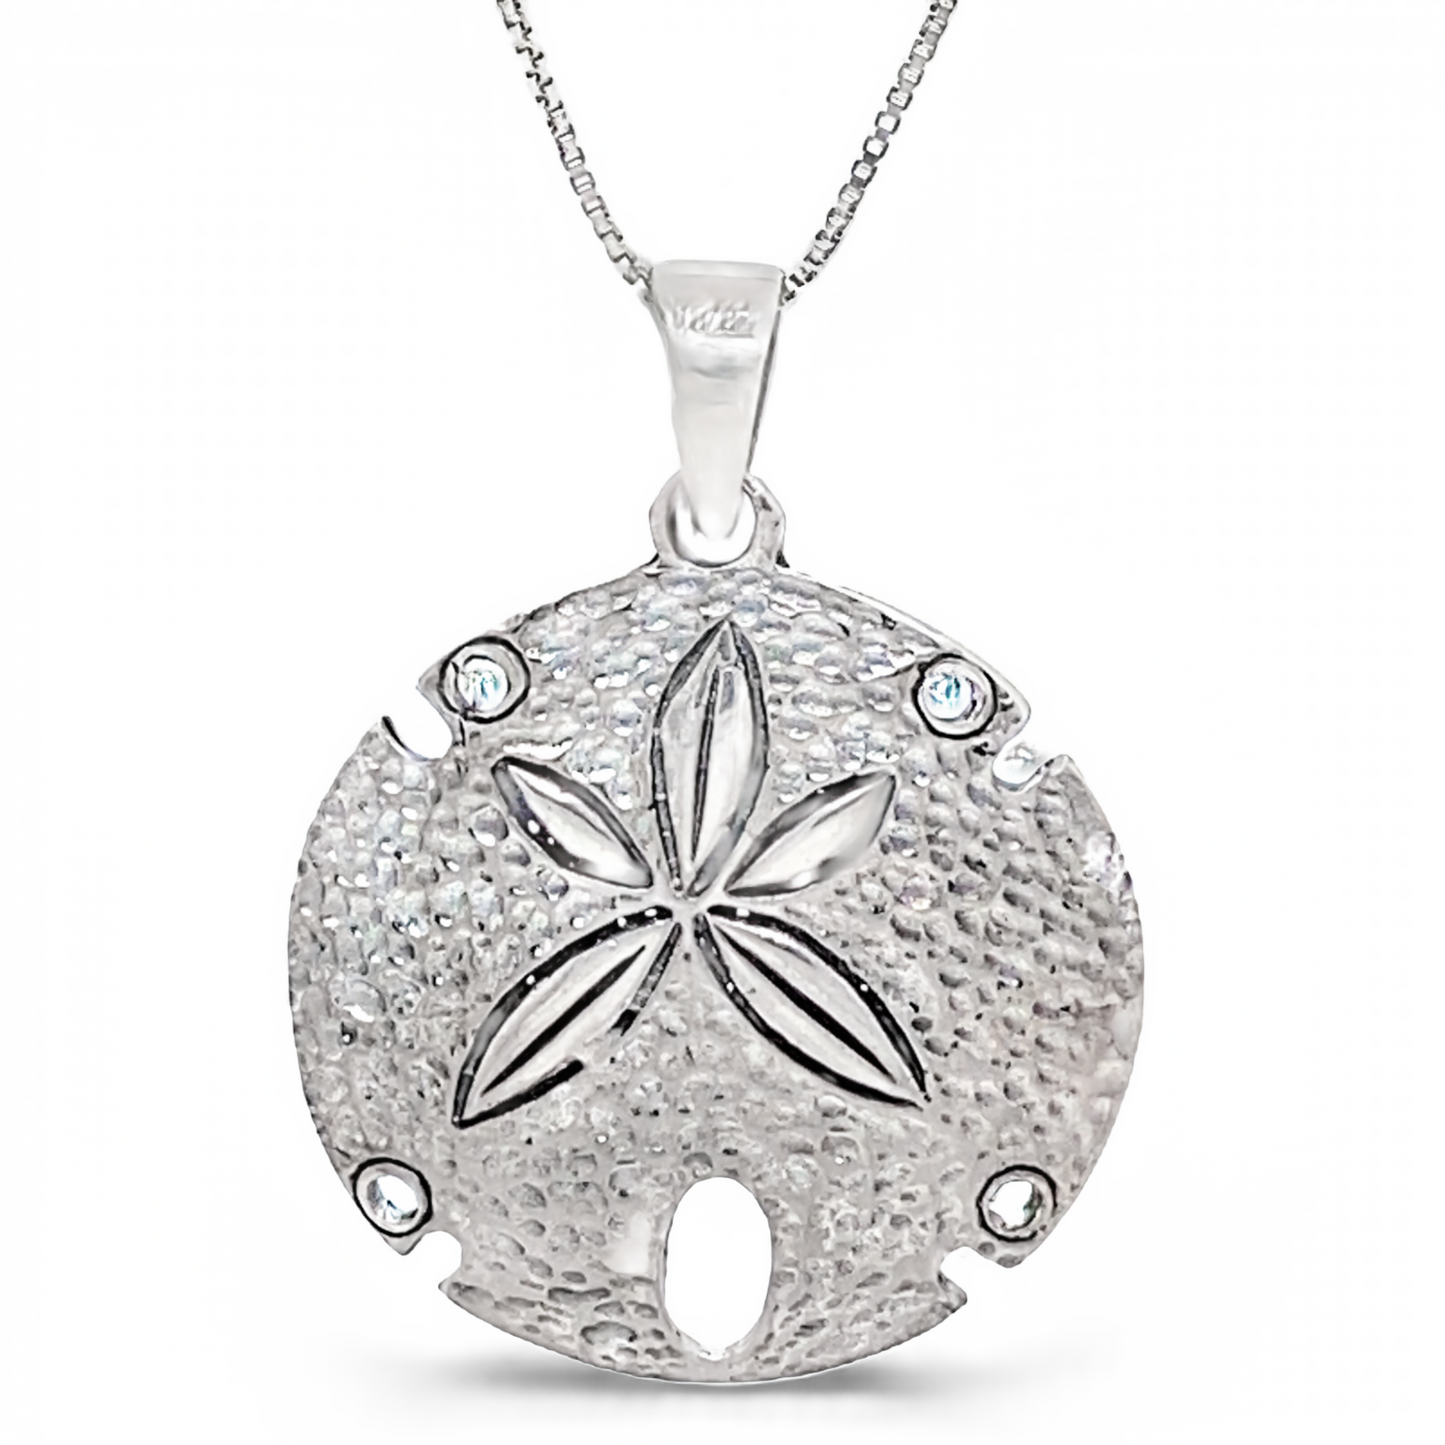 A Super Silver Sand Dollar Pendant With Textured Surface on a chain, radiating ocean elegance.